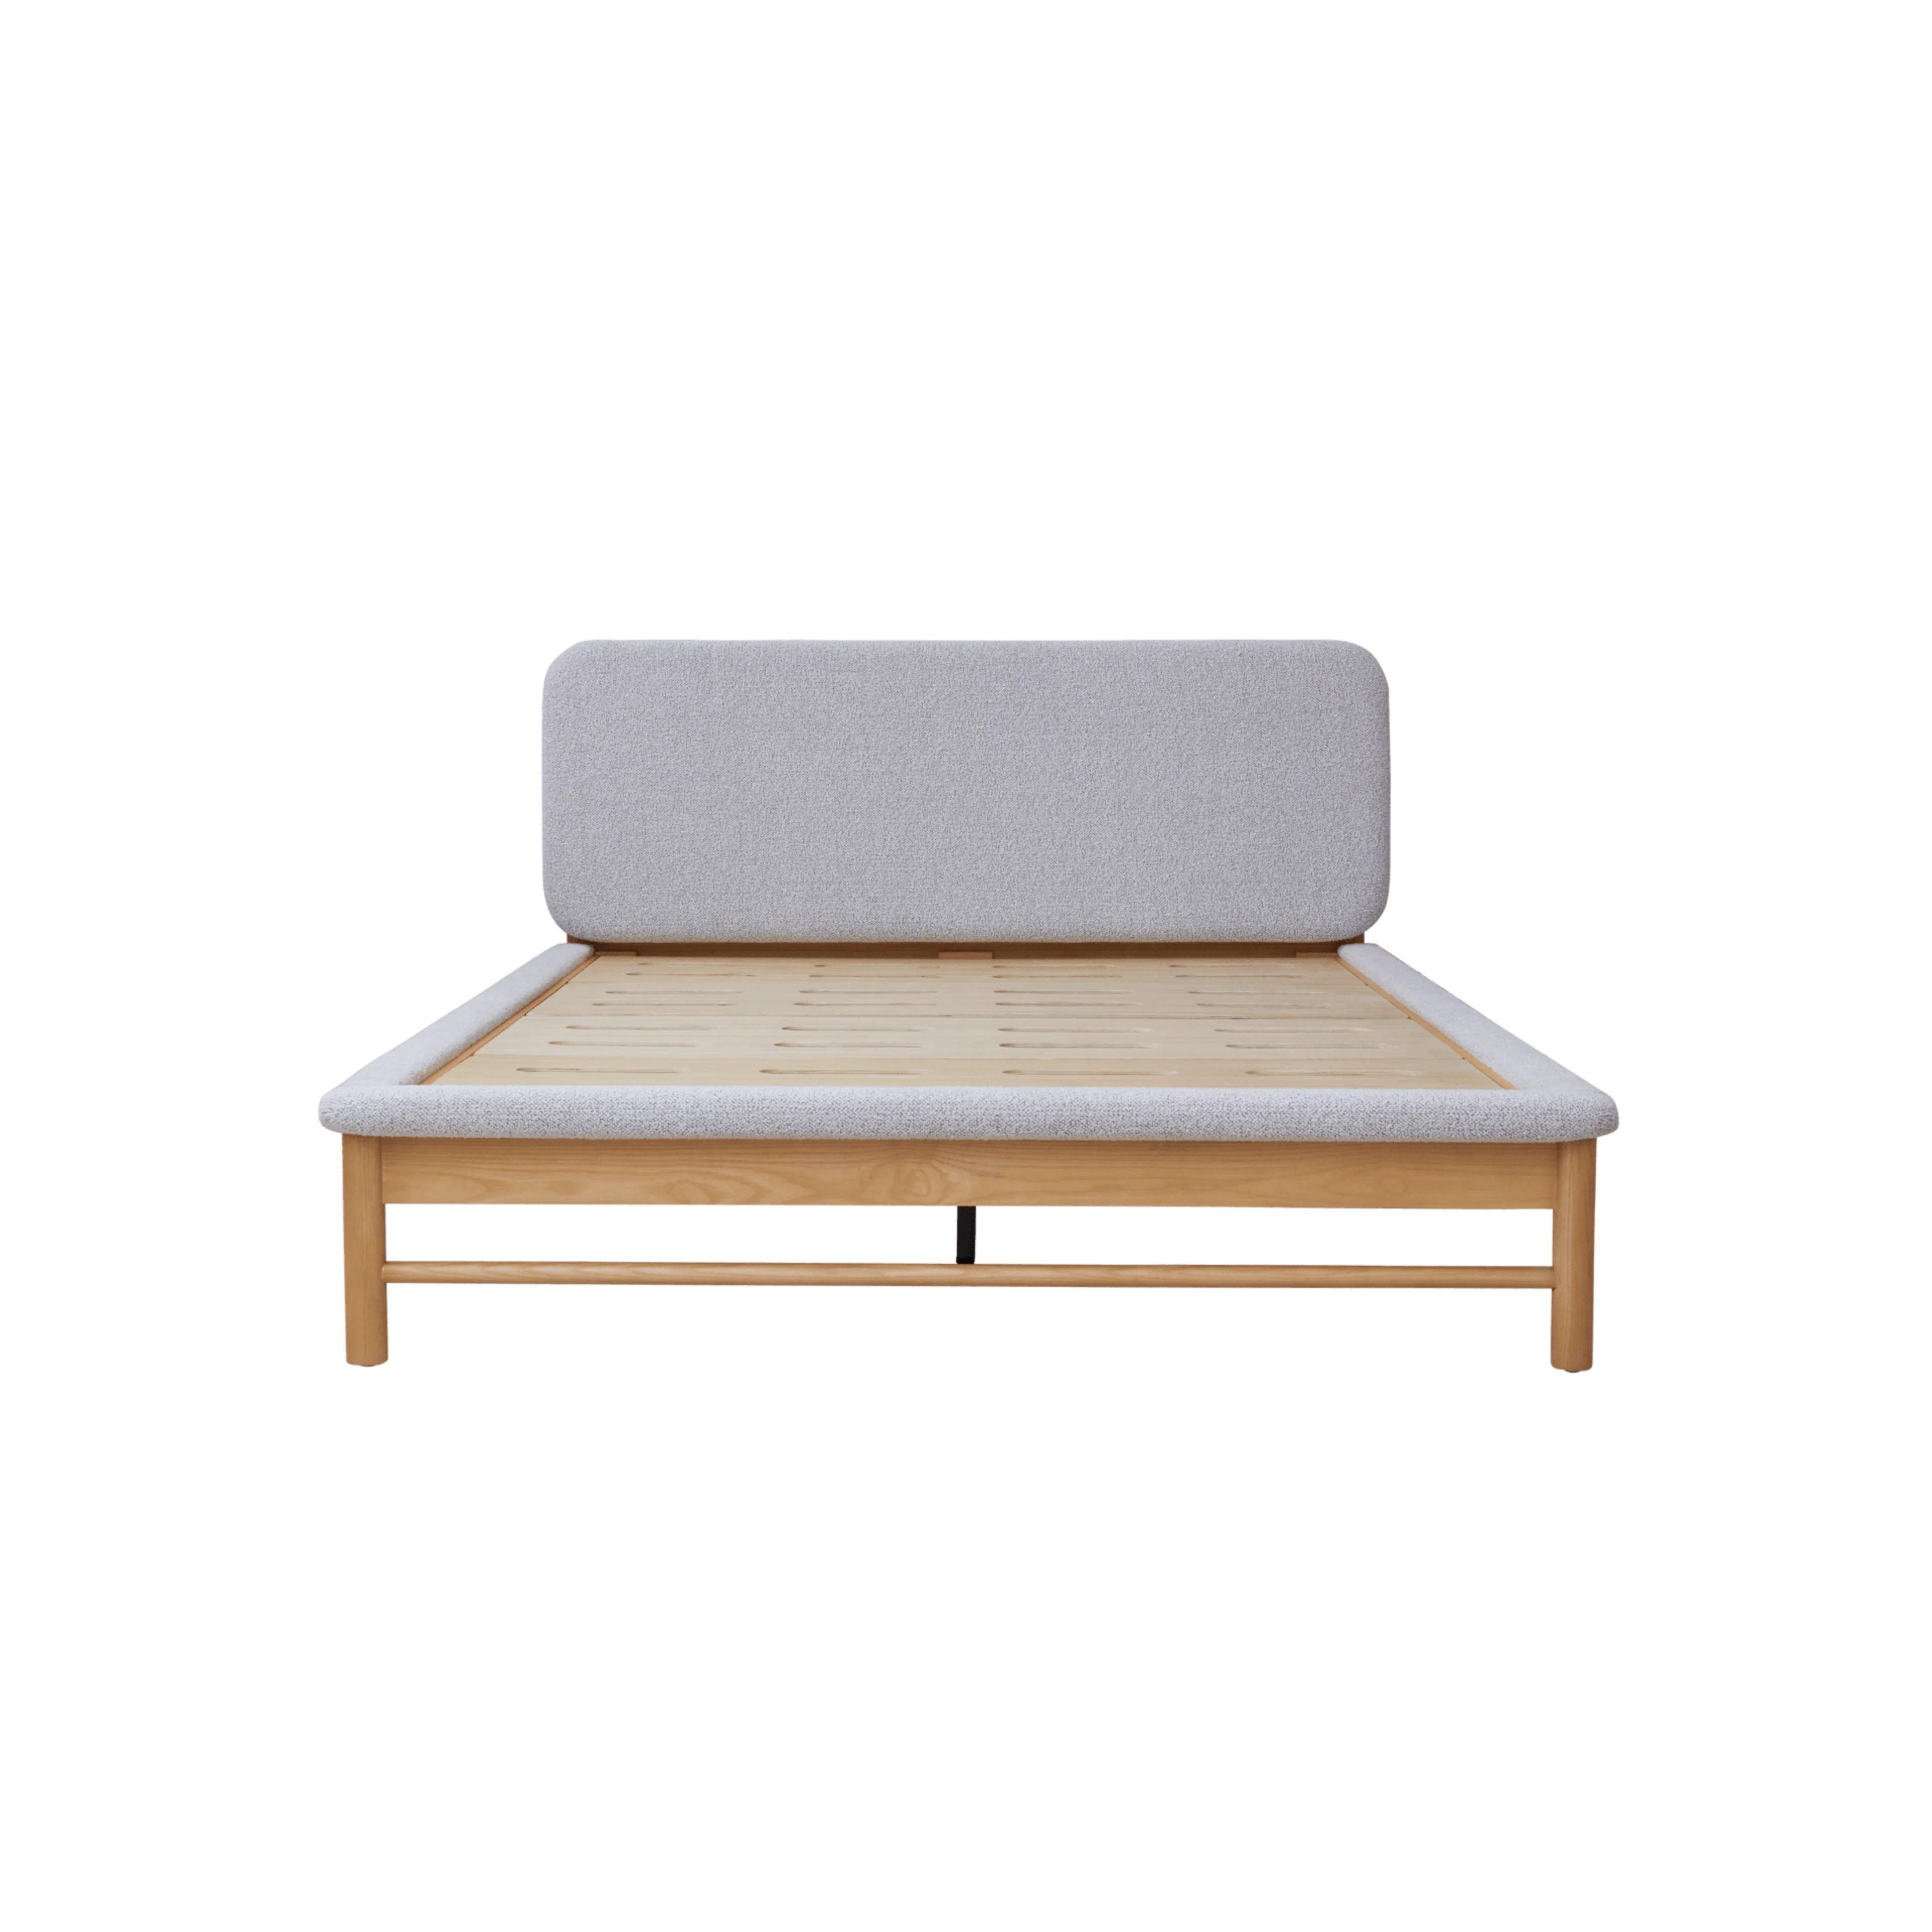 AU > Product Ivory BG > Paddington Bed Base Luxe Queen